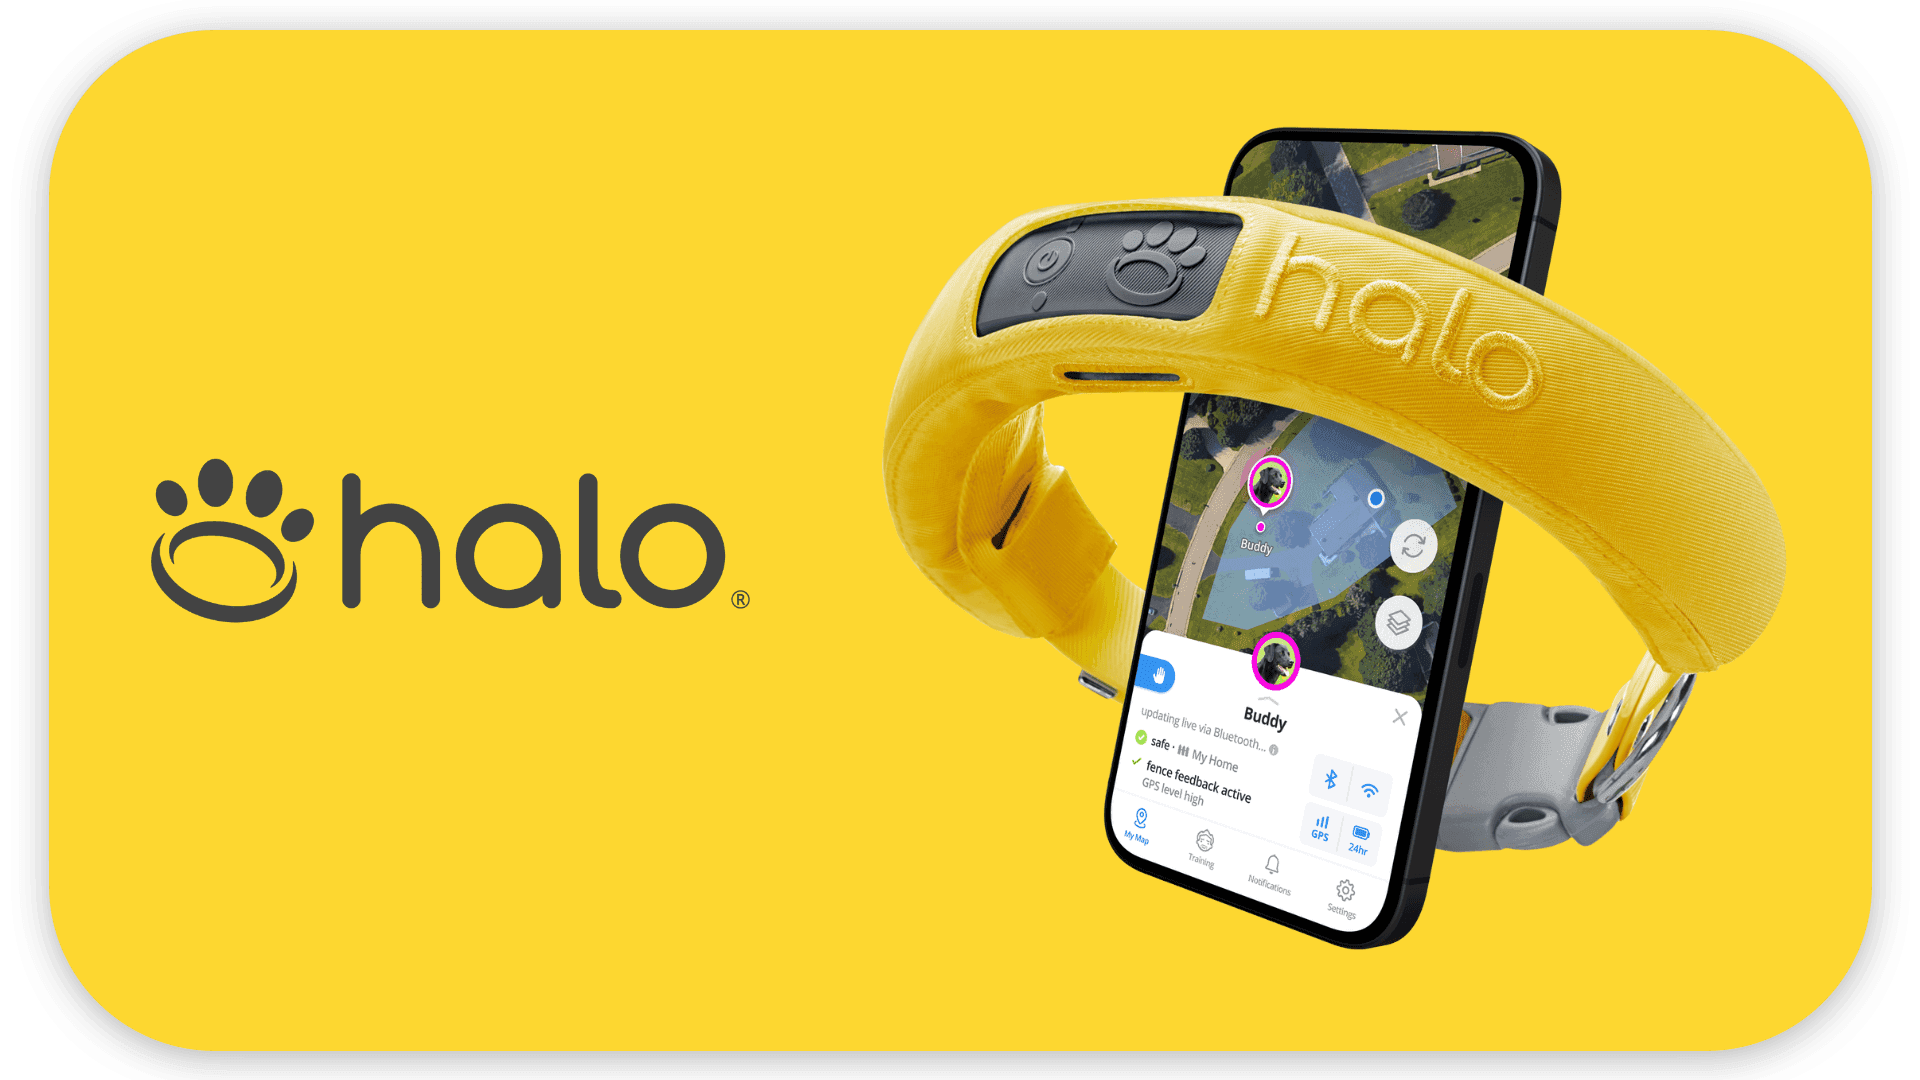 A yellow Halo dog collar is displayed with a mobile phone showing the Halo app interface on a yellow background.